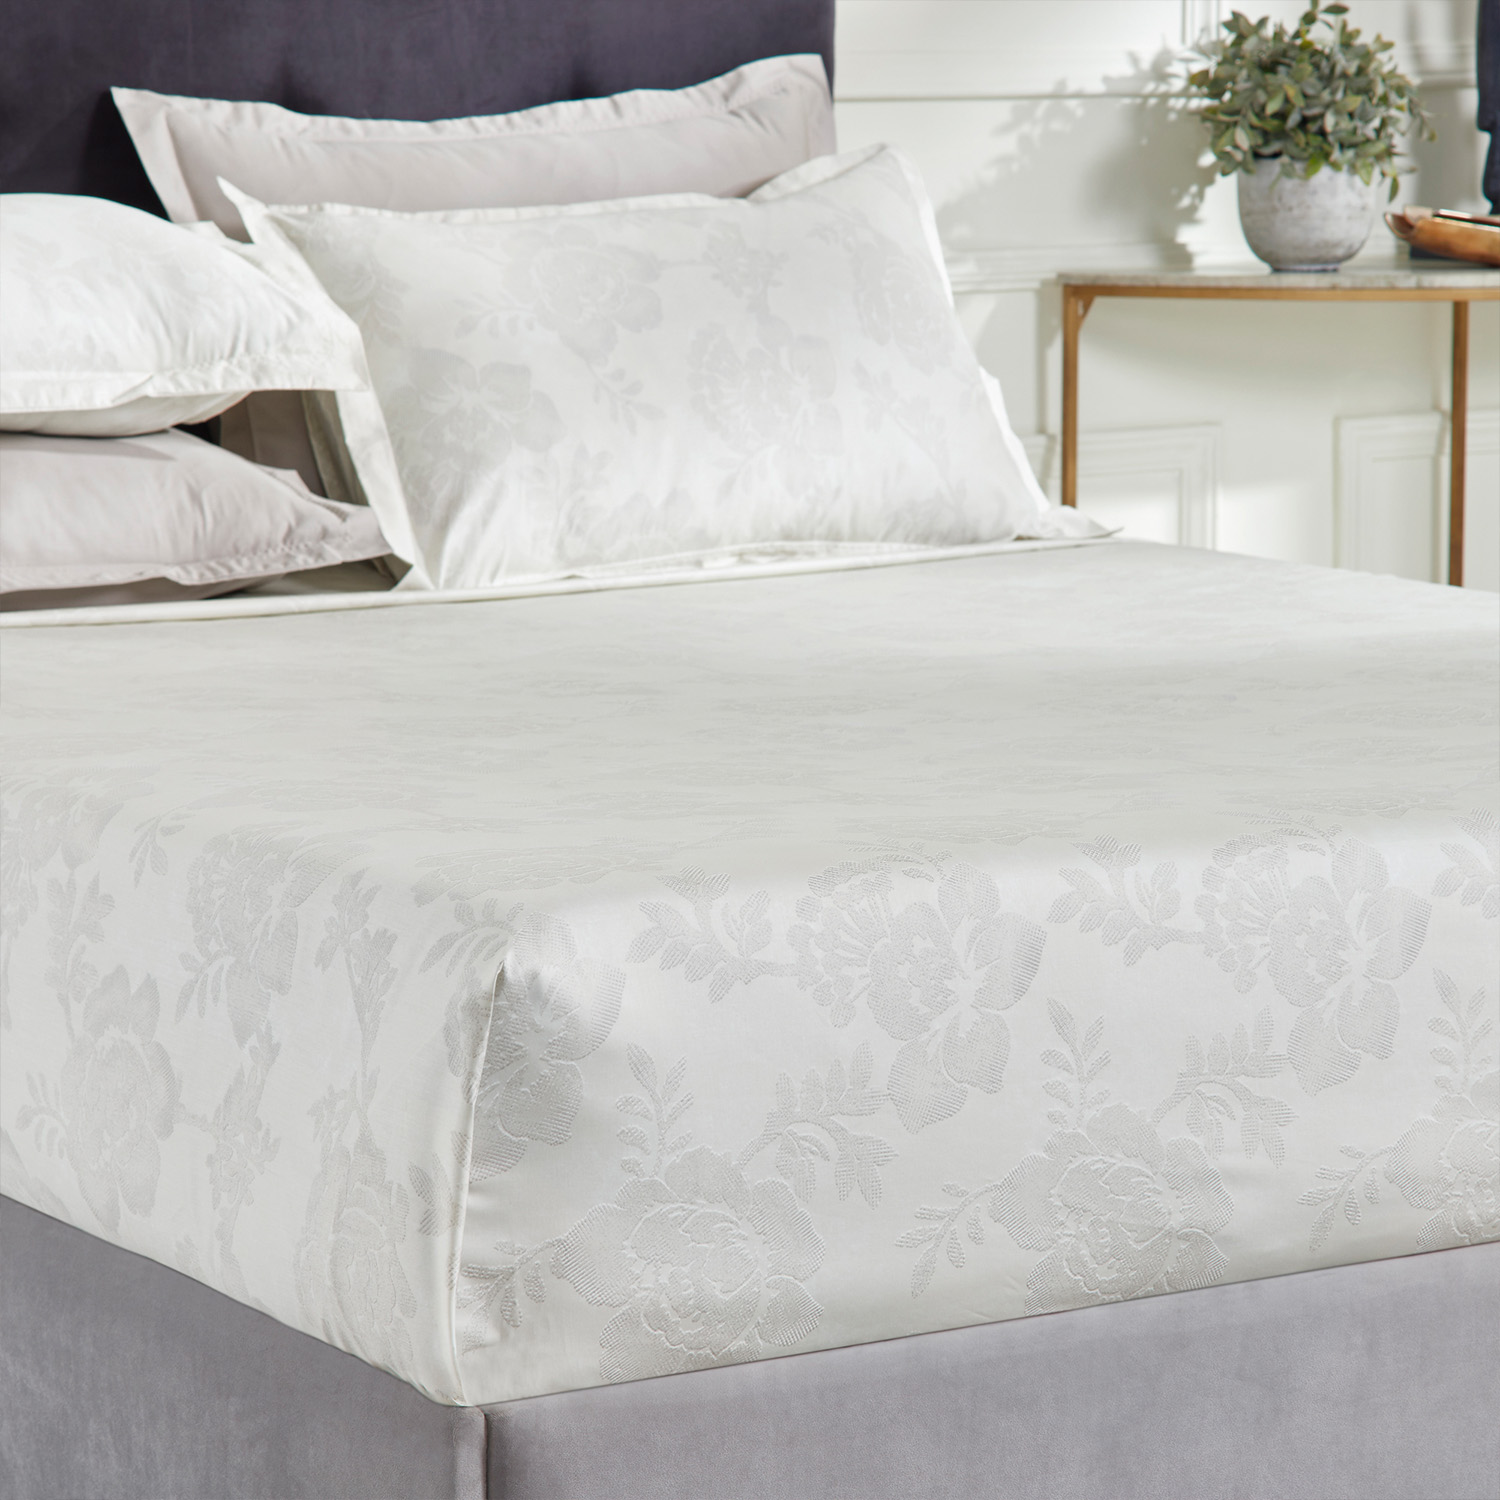 finding-the-perfect-double-bed-sheets-online